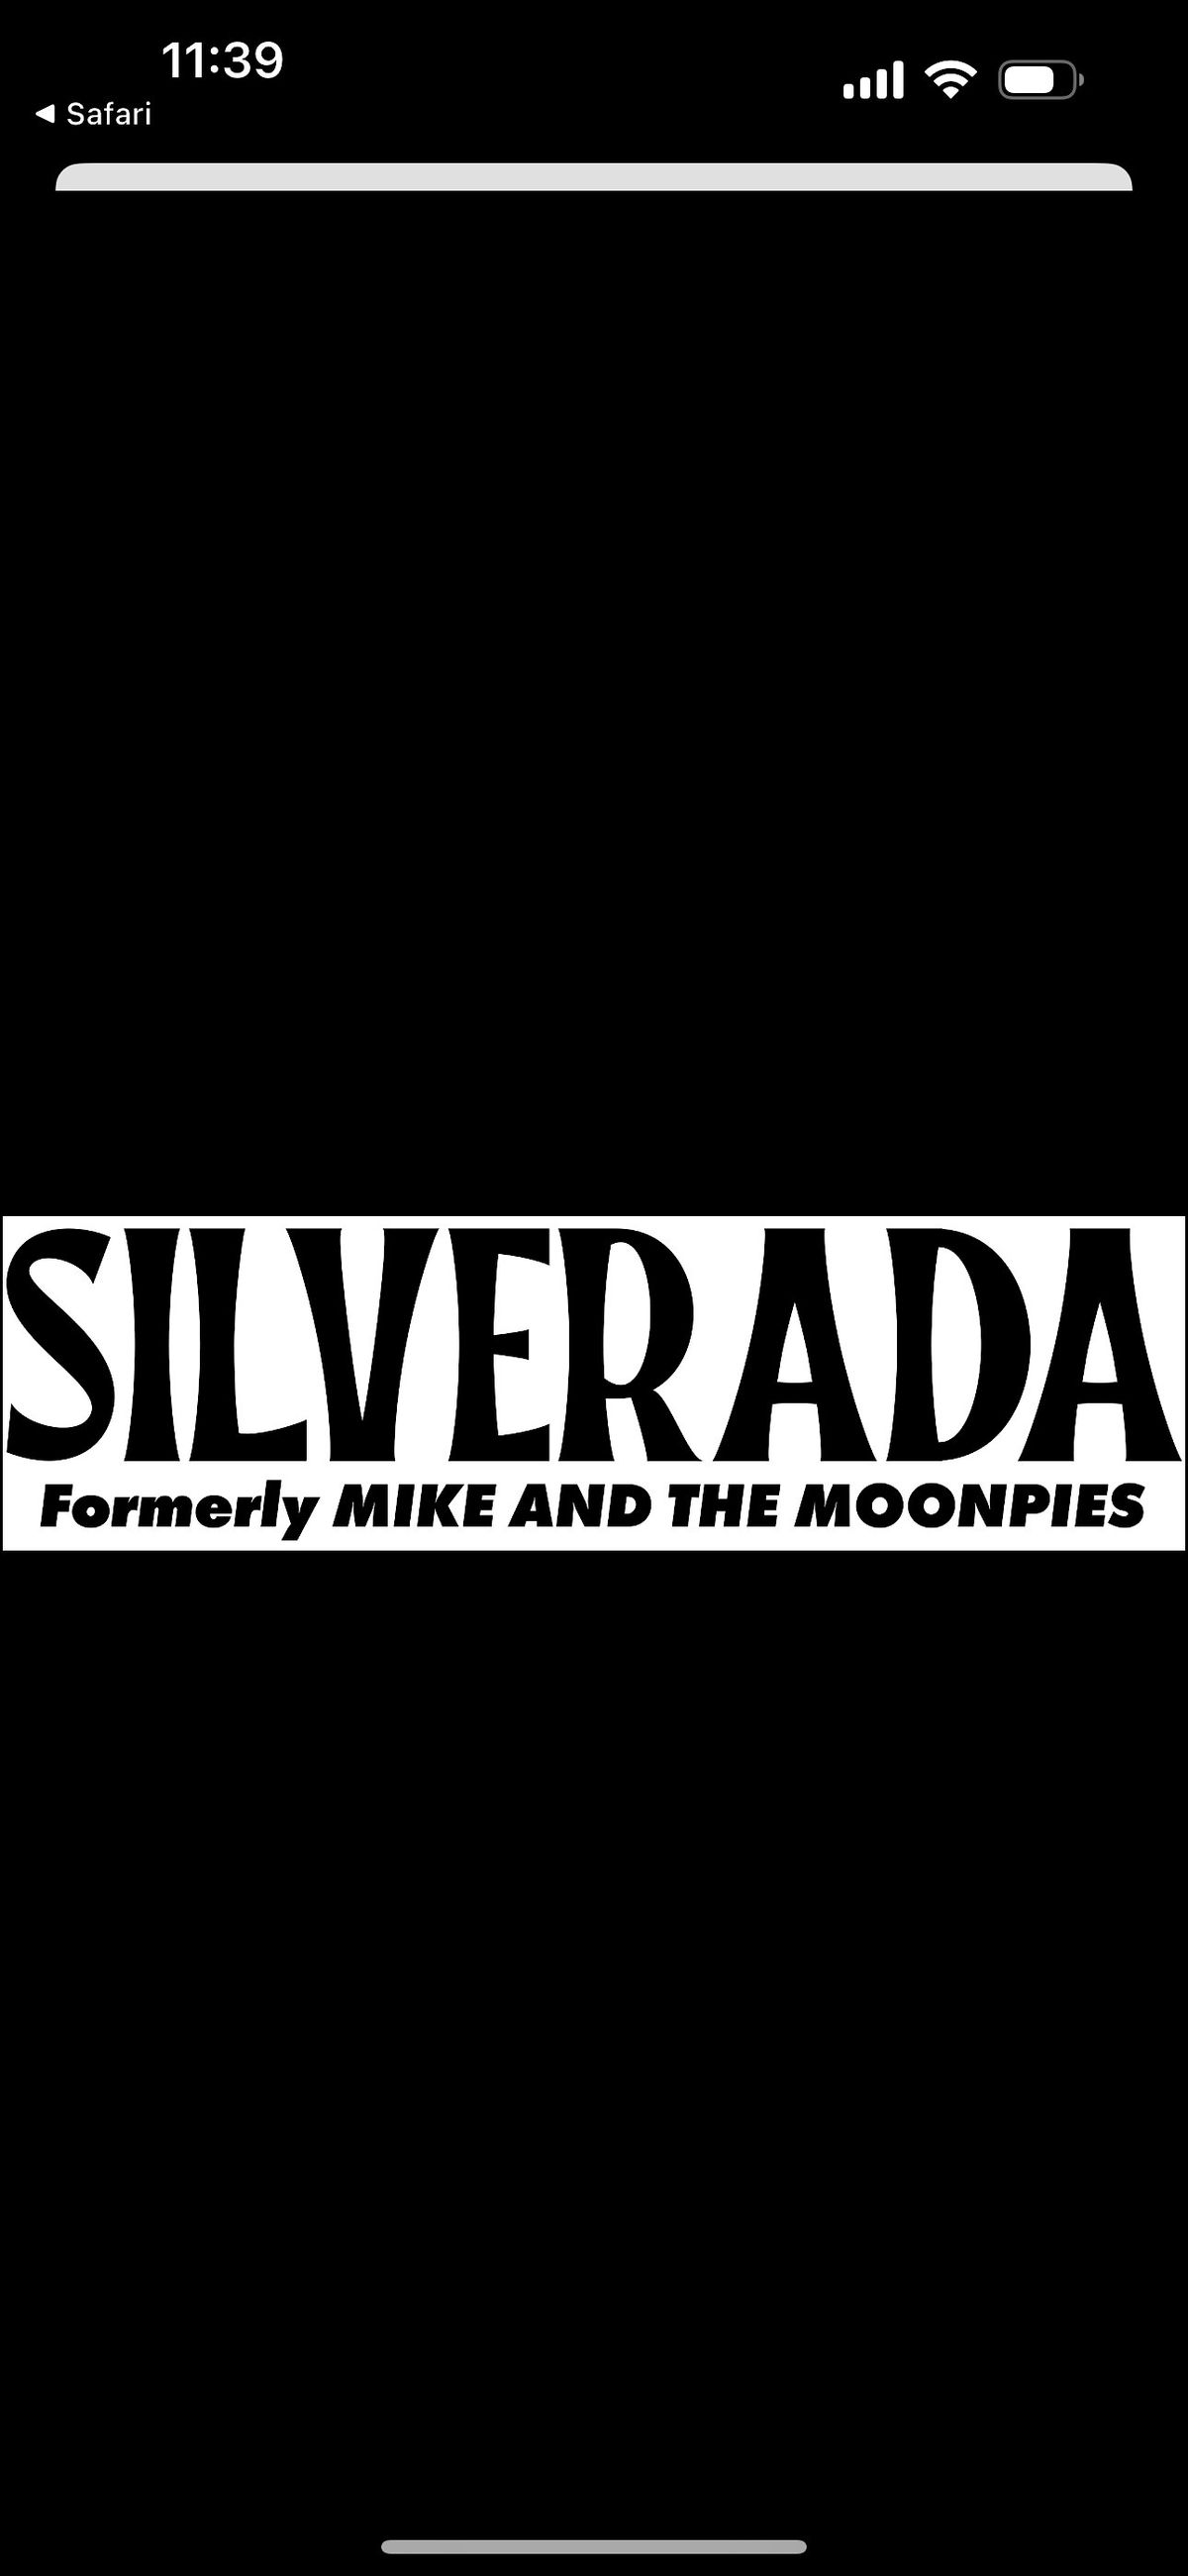 SILVERADA (Formerly Mike & The Moonpies)